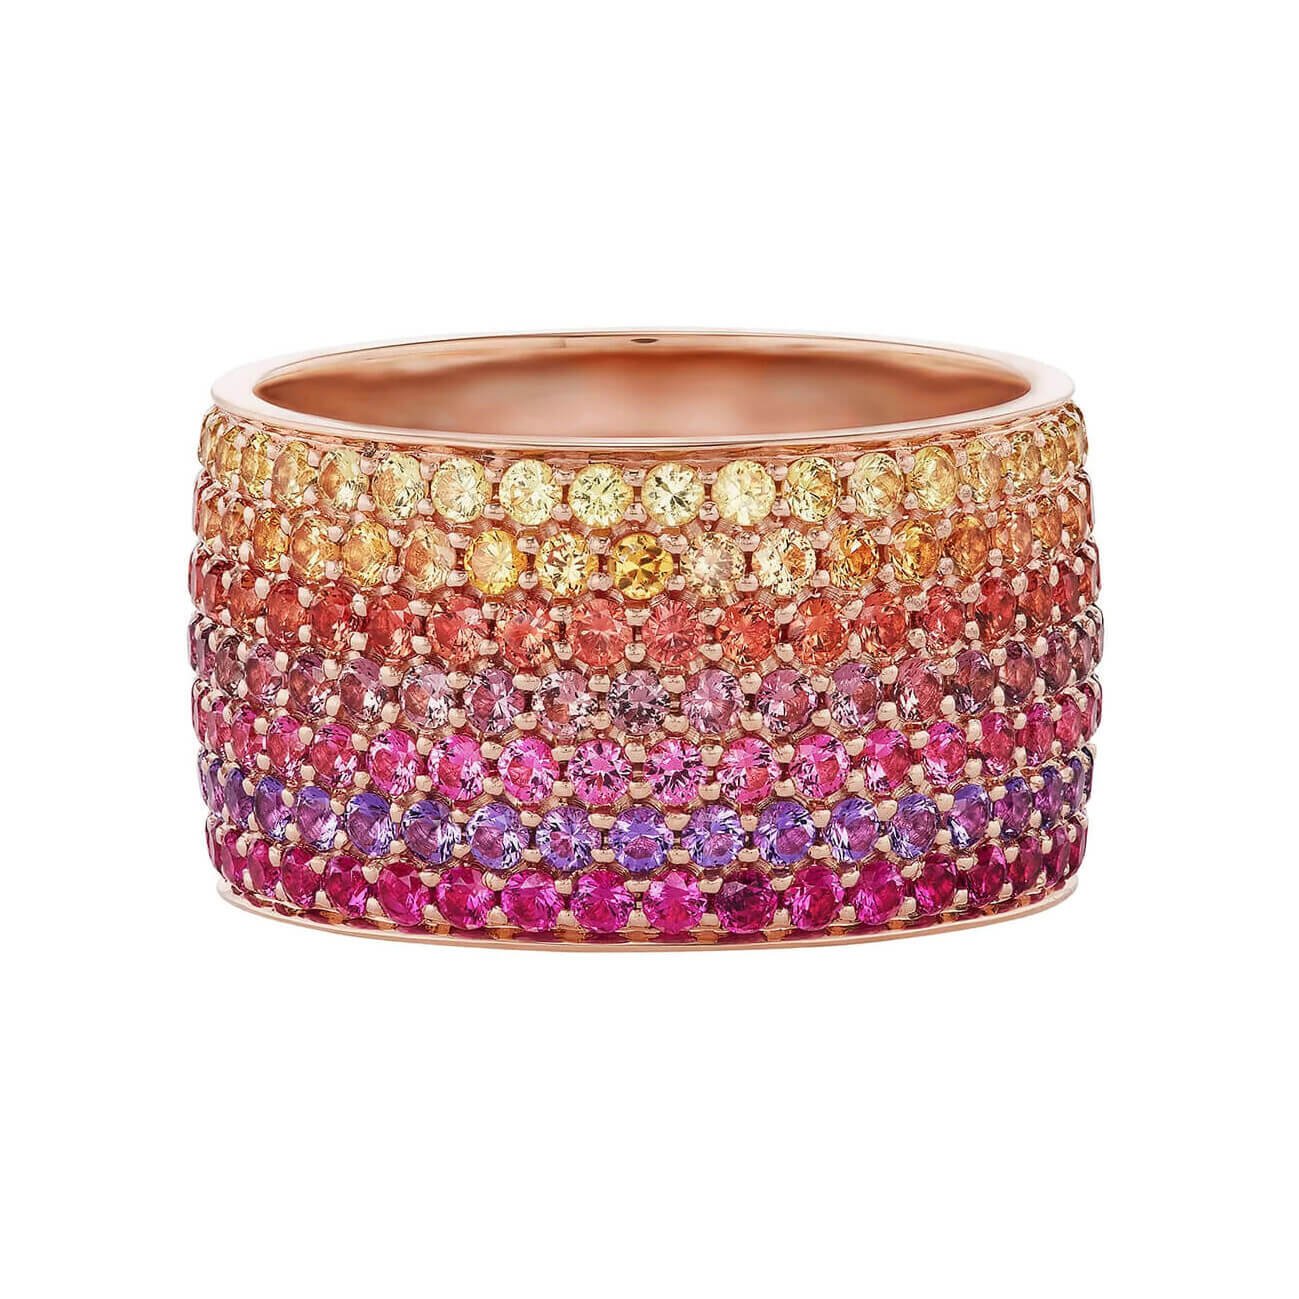 Emily P. Wheeler 18k rose gold, sapphires, amethyst, and spinel “Los Angeles” ombre cigar ring, $9,800 at Emily P. Wheeler